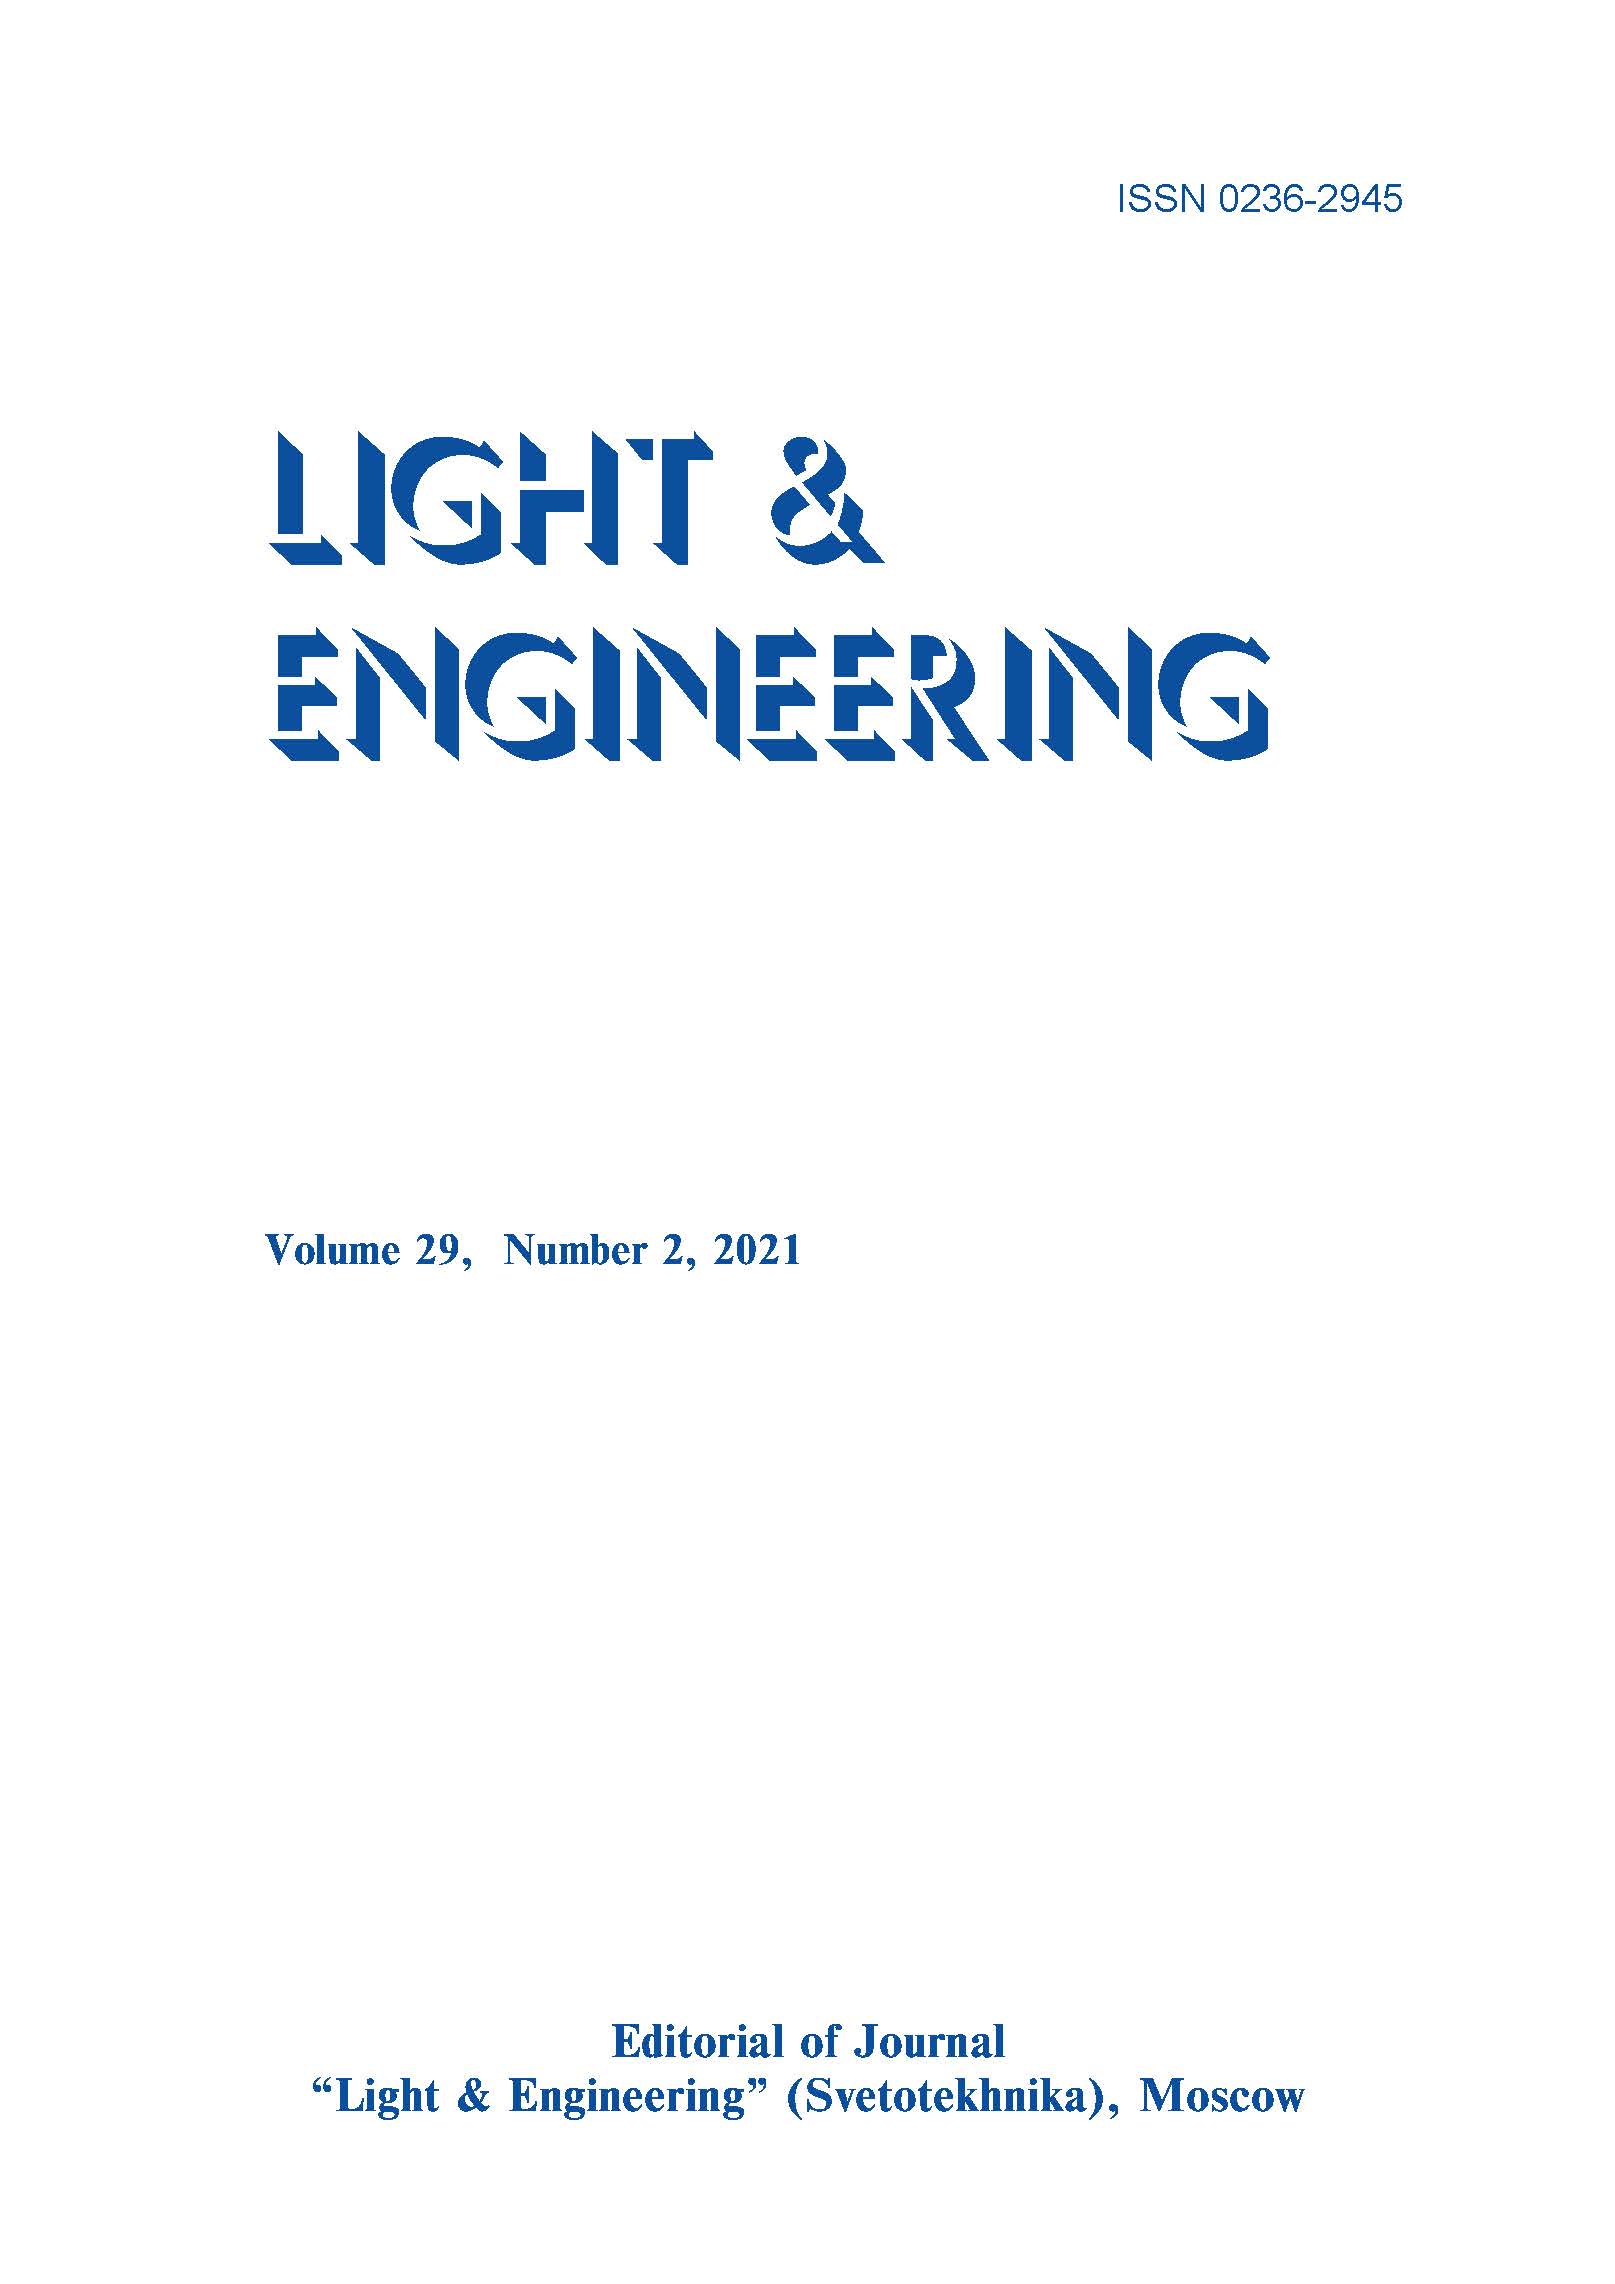 Study of the Acoustic Properties of Lighting Systems Based on Hollow Mirrored Tubular Light Guides L&E, Vol. 29, No. 2, 2021